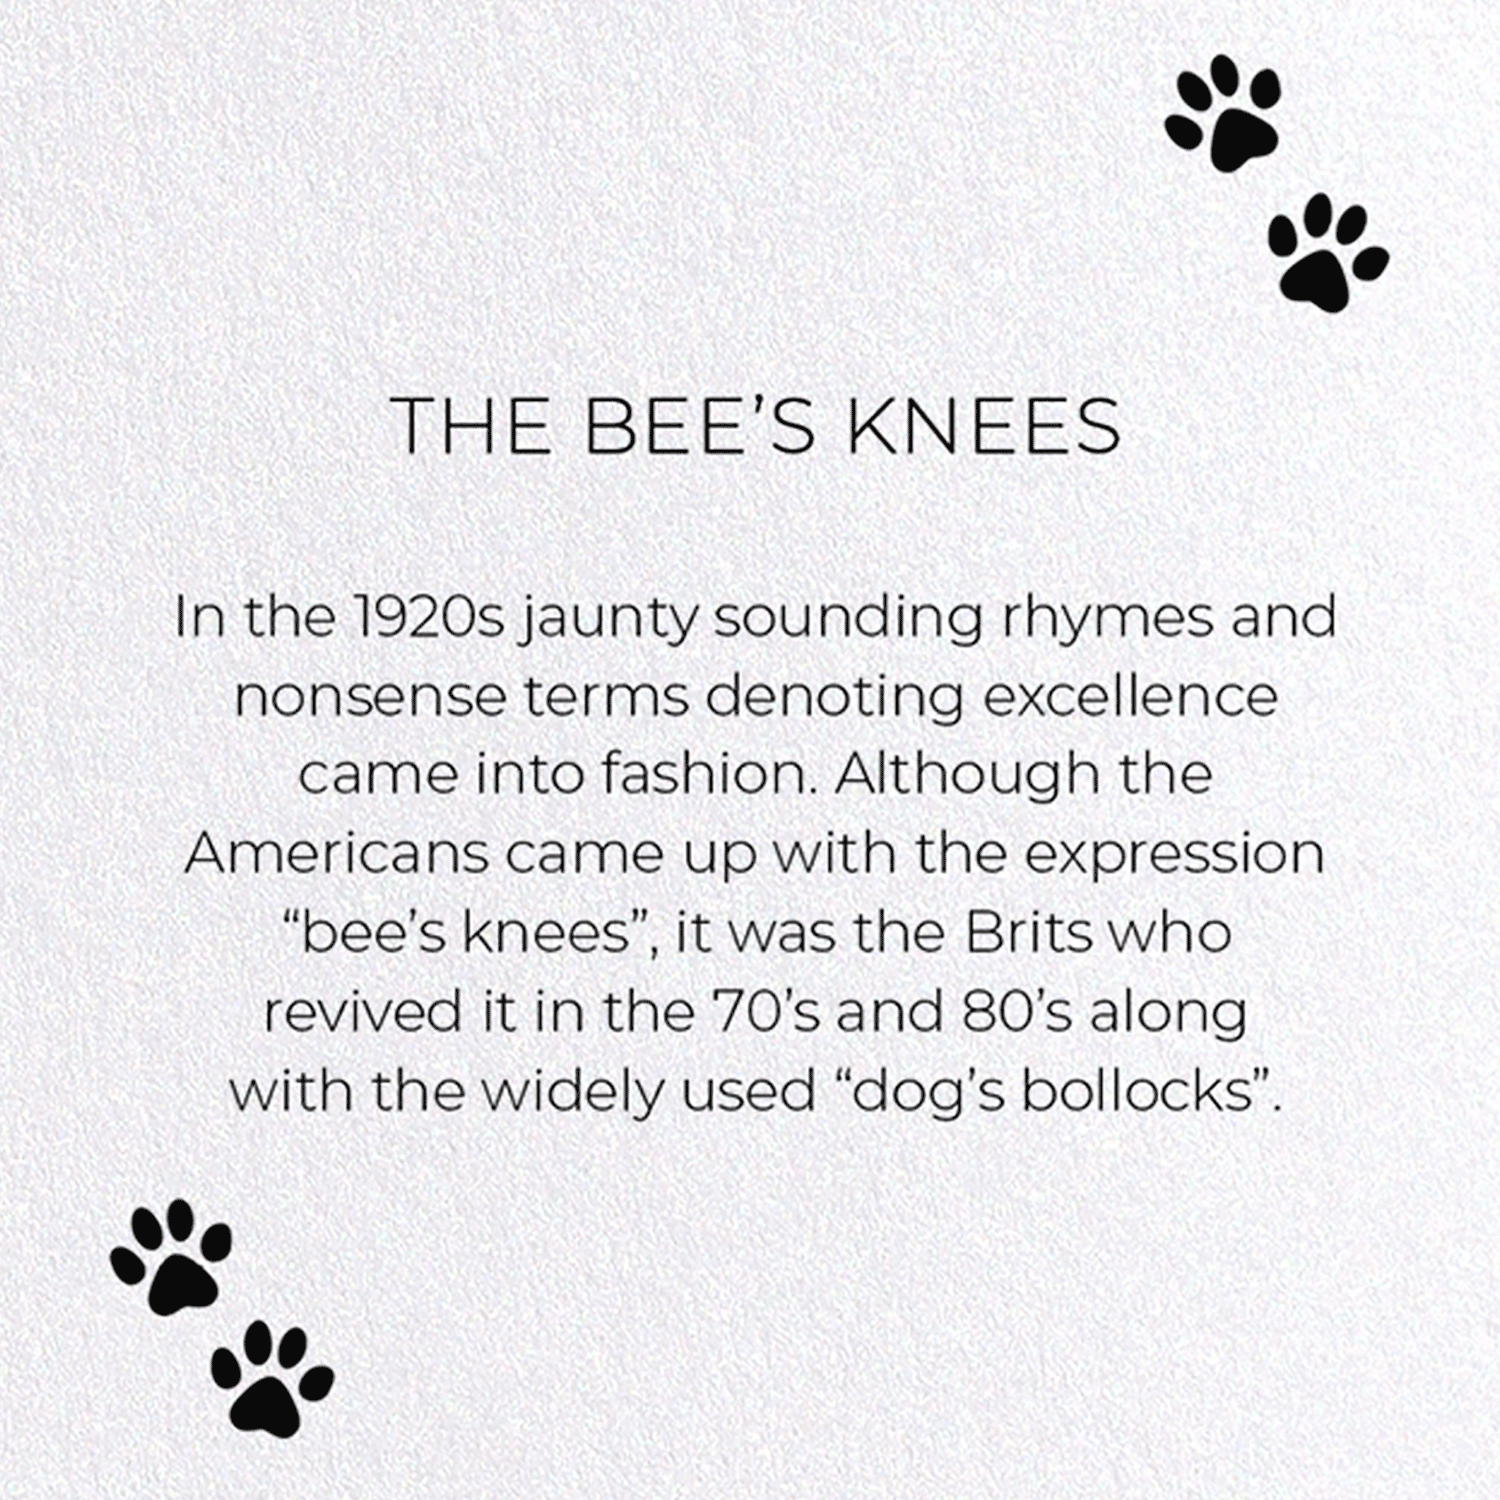 THE BEE'S KNEES: Funny Animal Greeting Card